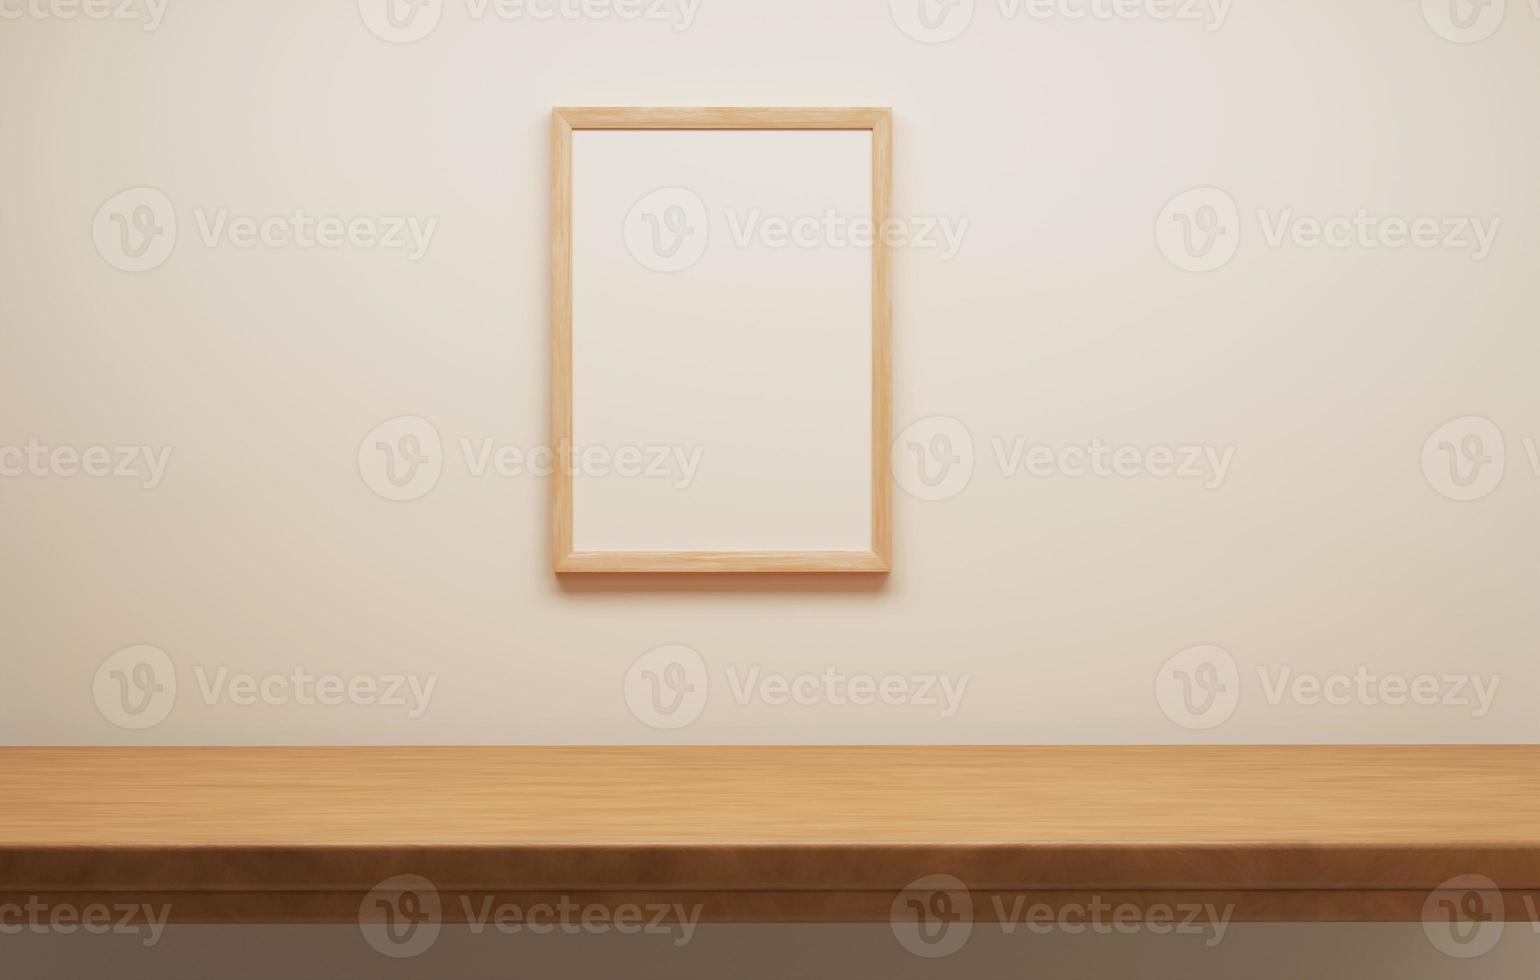 Natural wood table top with wood frame on warm cream walls. 3d illustration 3d rendering photo